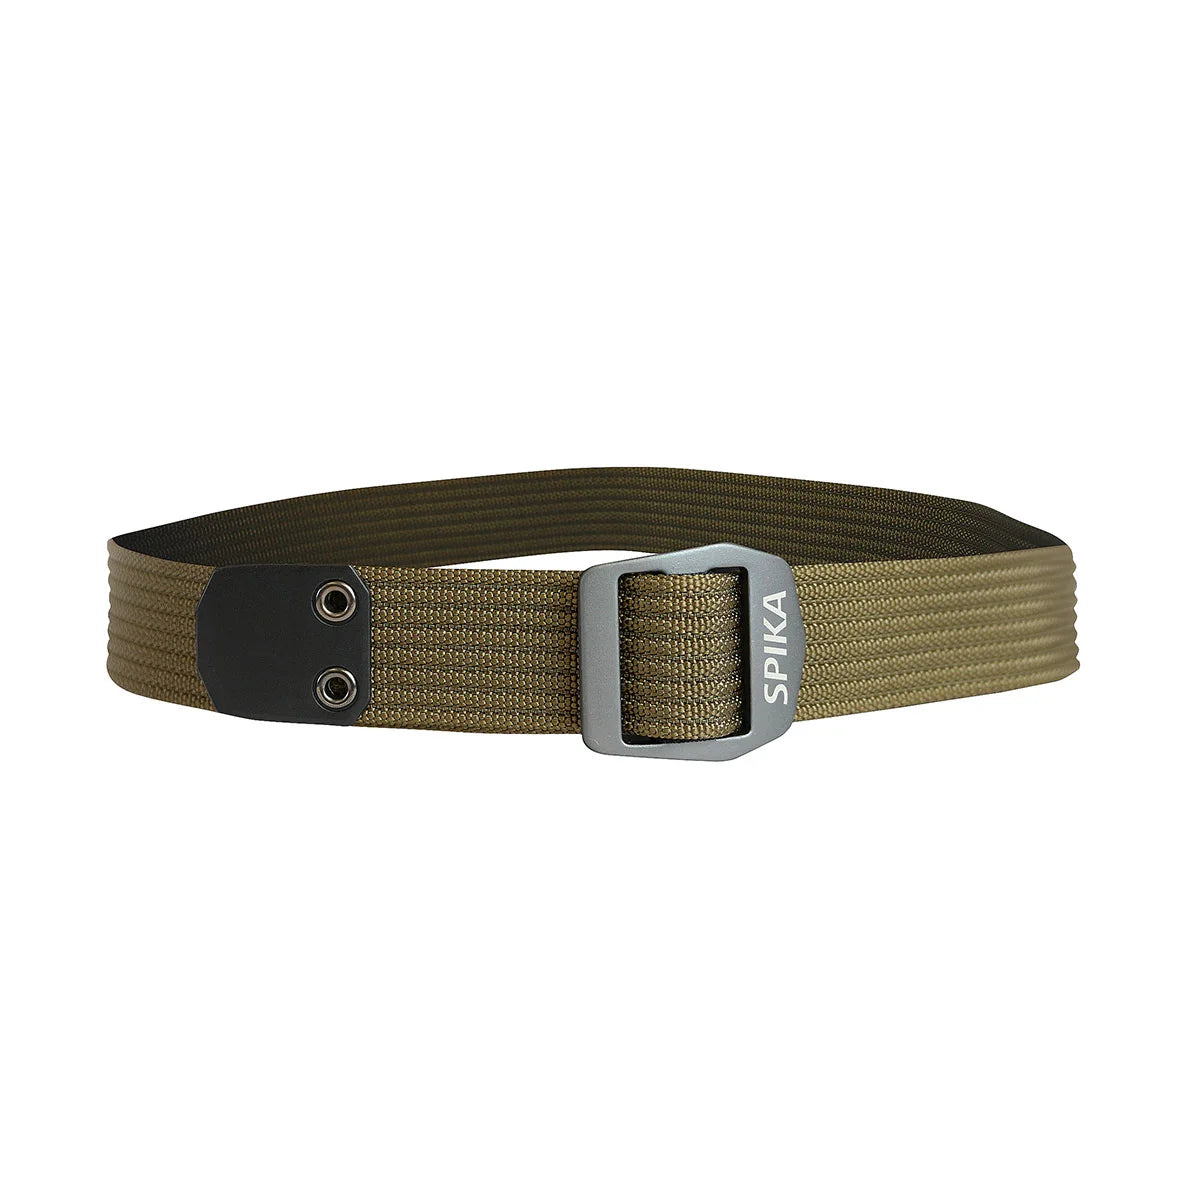 Spika Ranger Belt Brown -  - Mansfield Hunting & Fishing - Products to prepare for Corona Virus